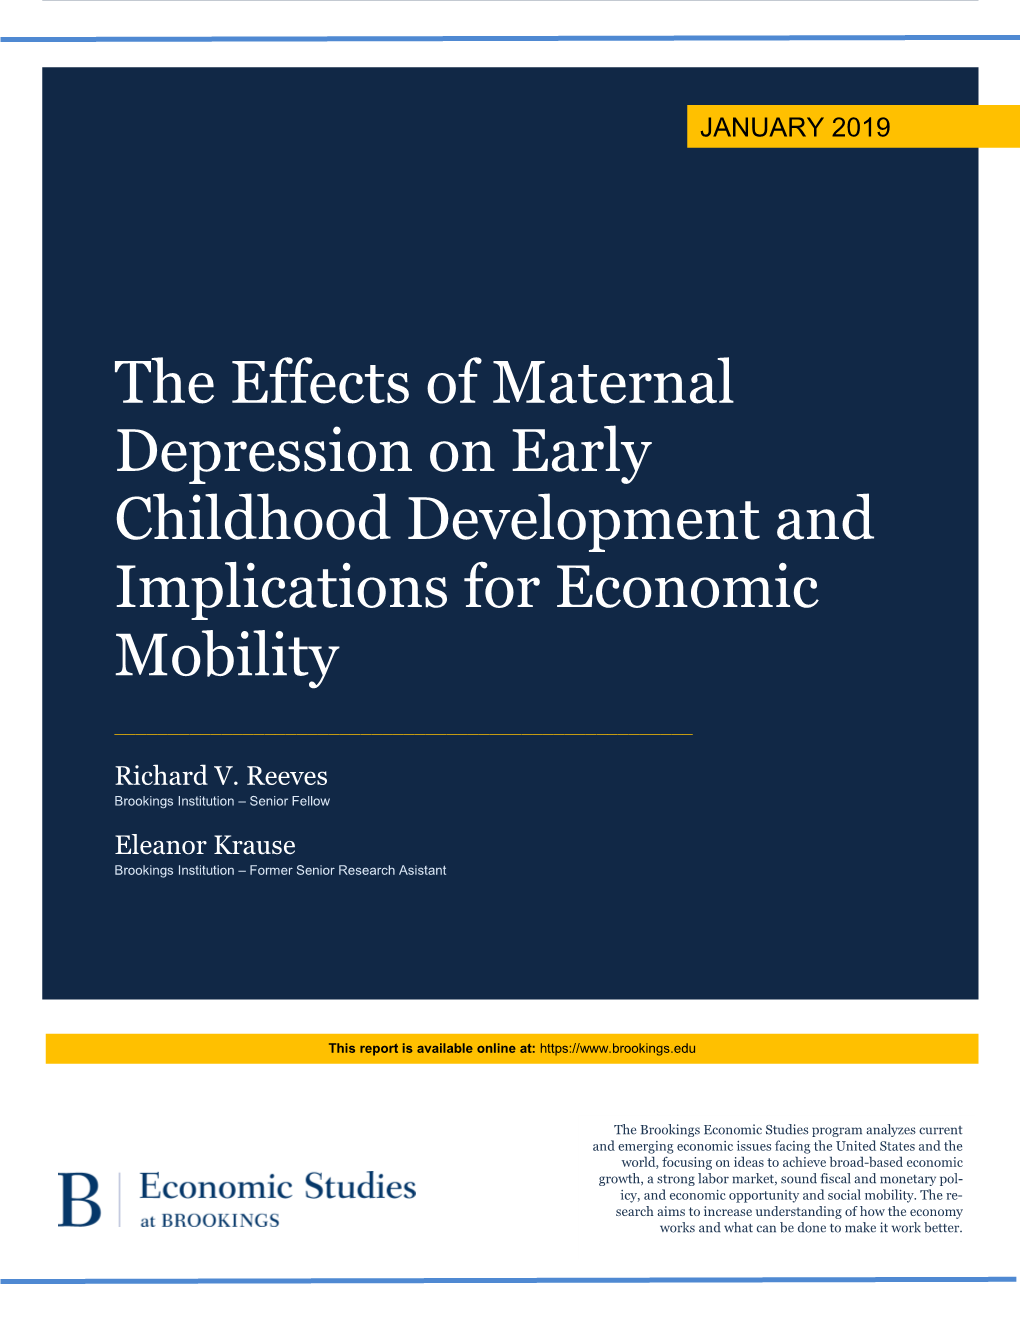 The Effects of Maternal Depression on Early Childhood Development and Implications for Economic Mobility